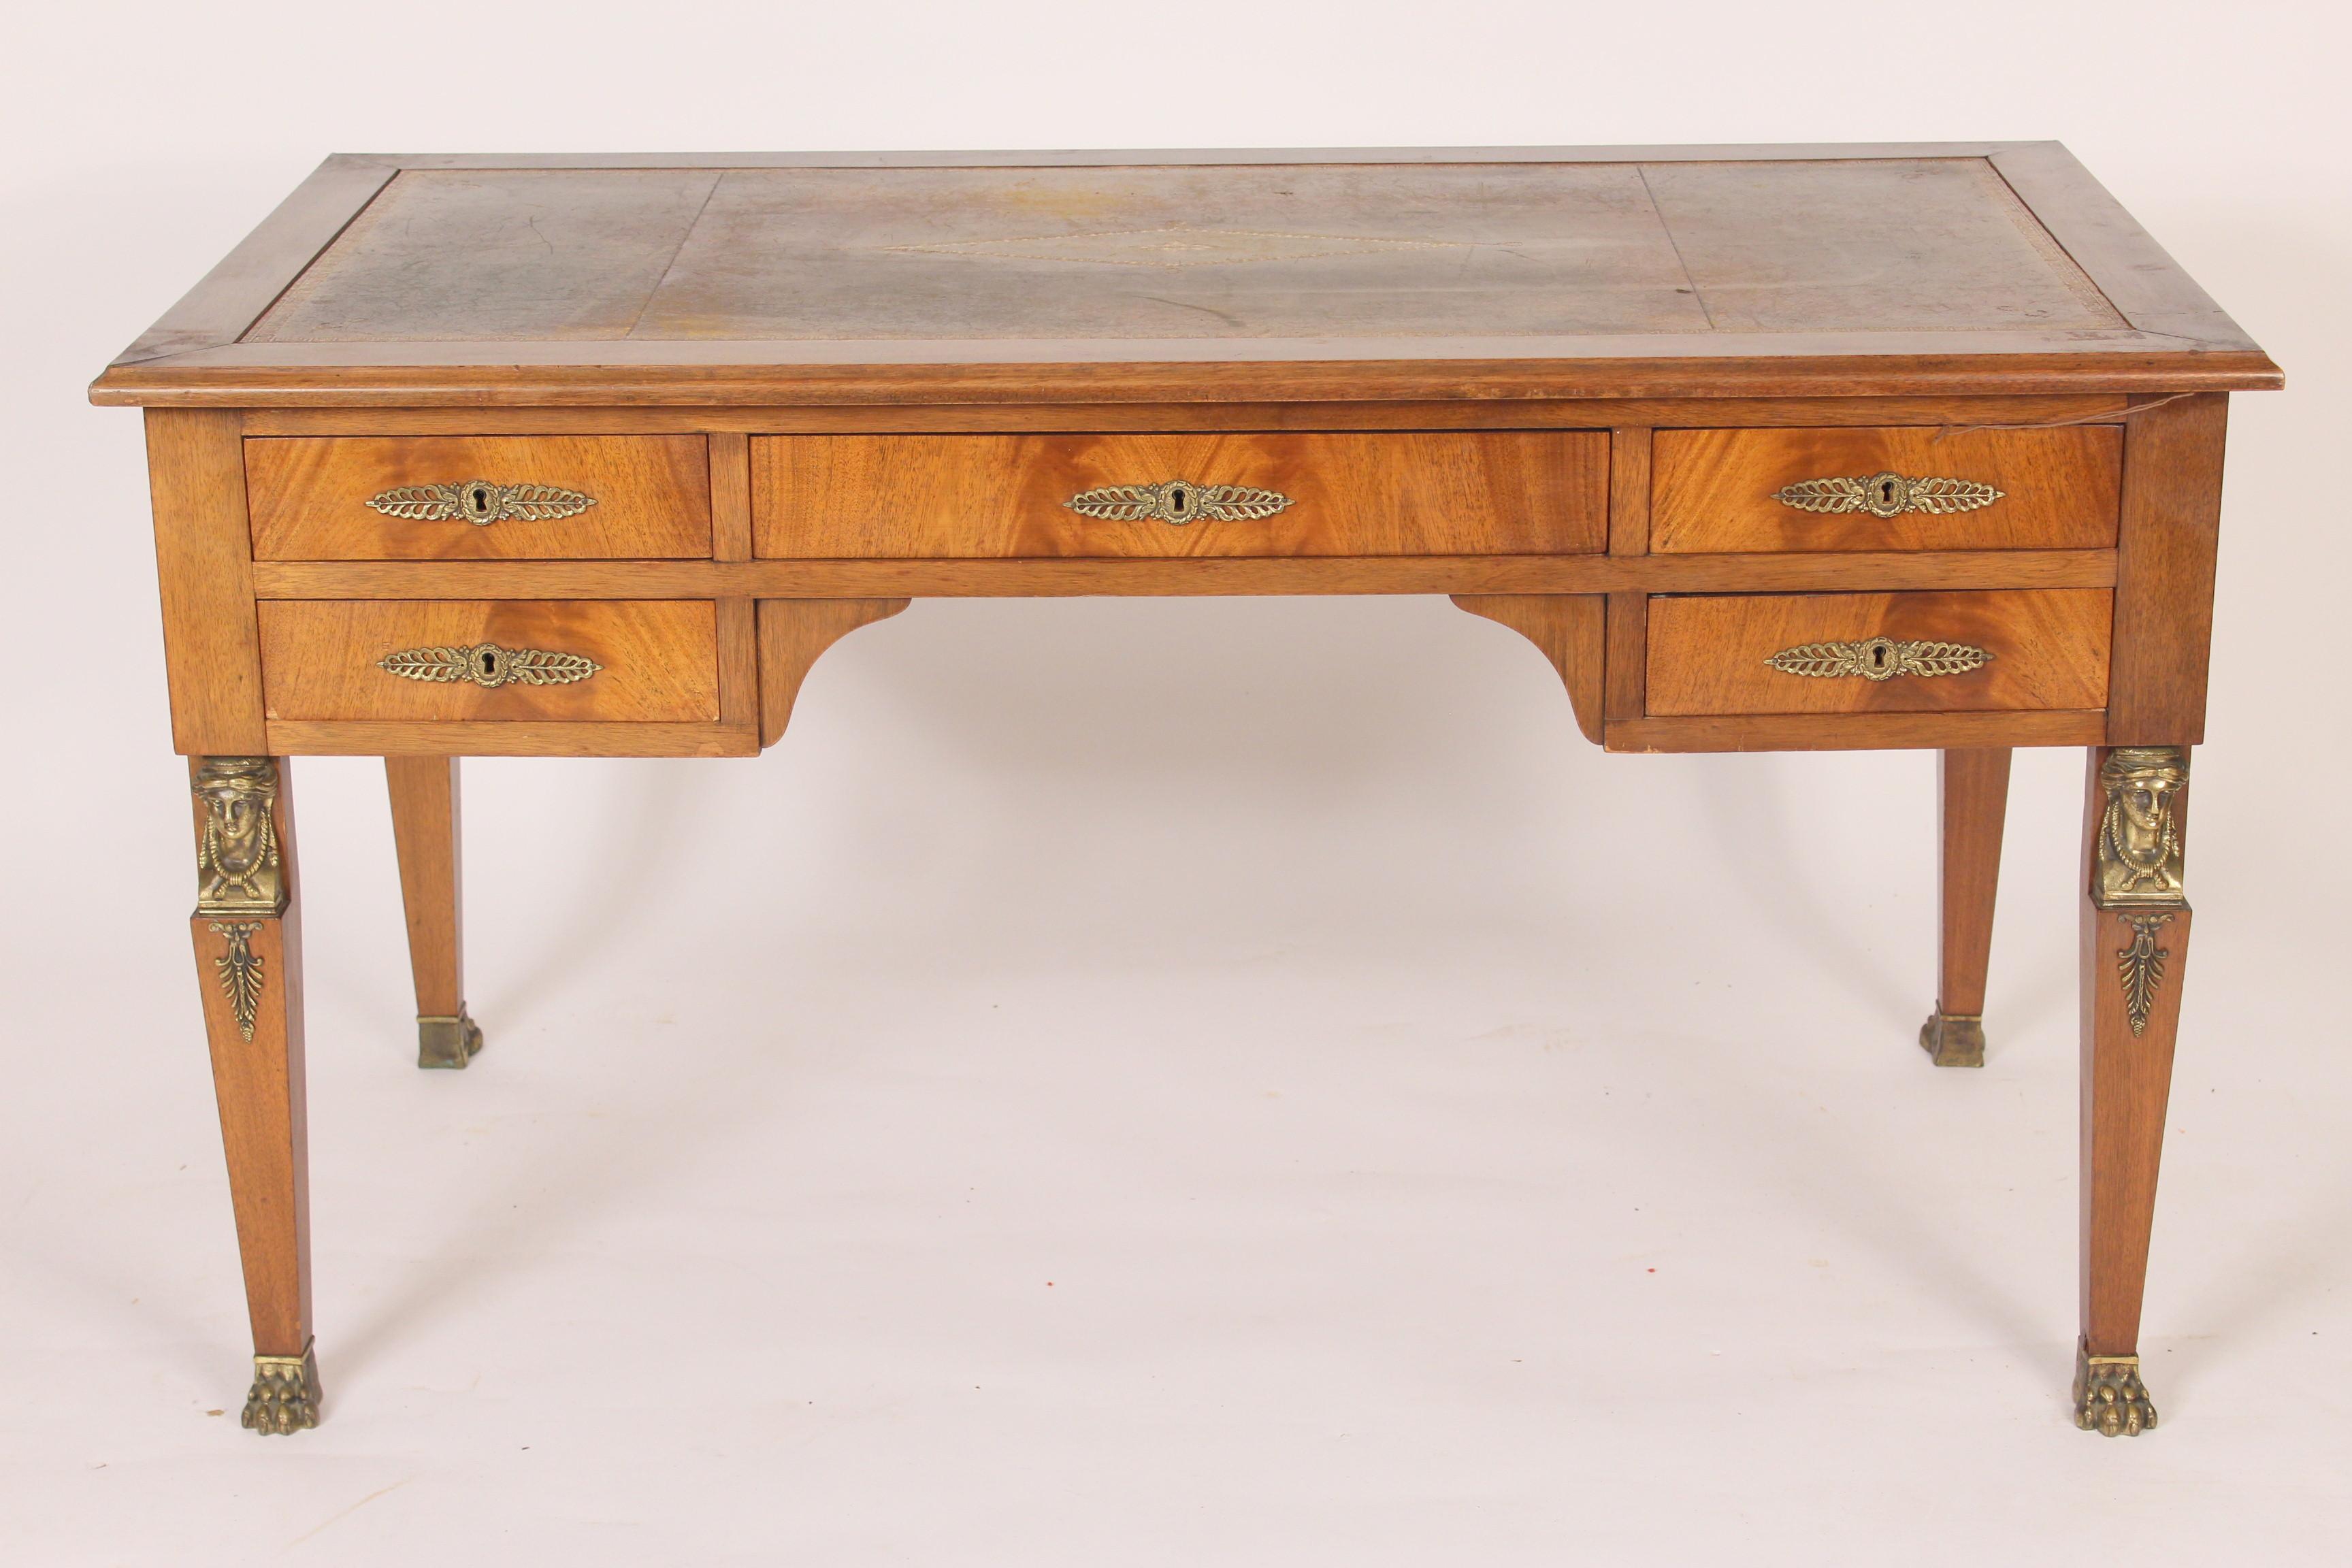 Empire style mahogany desk with a tooled leather top and brass mounts, made circa 1950s.